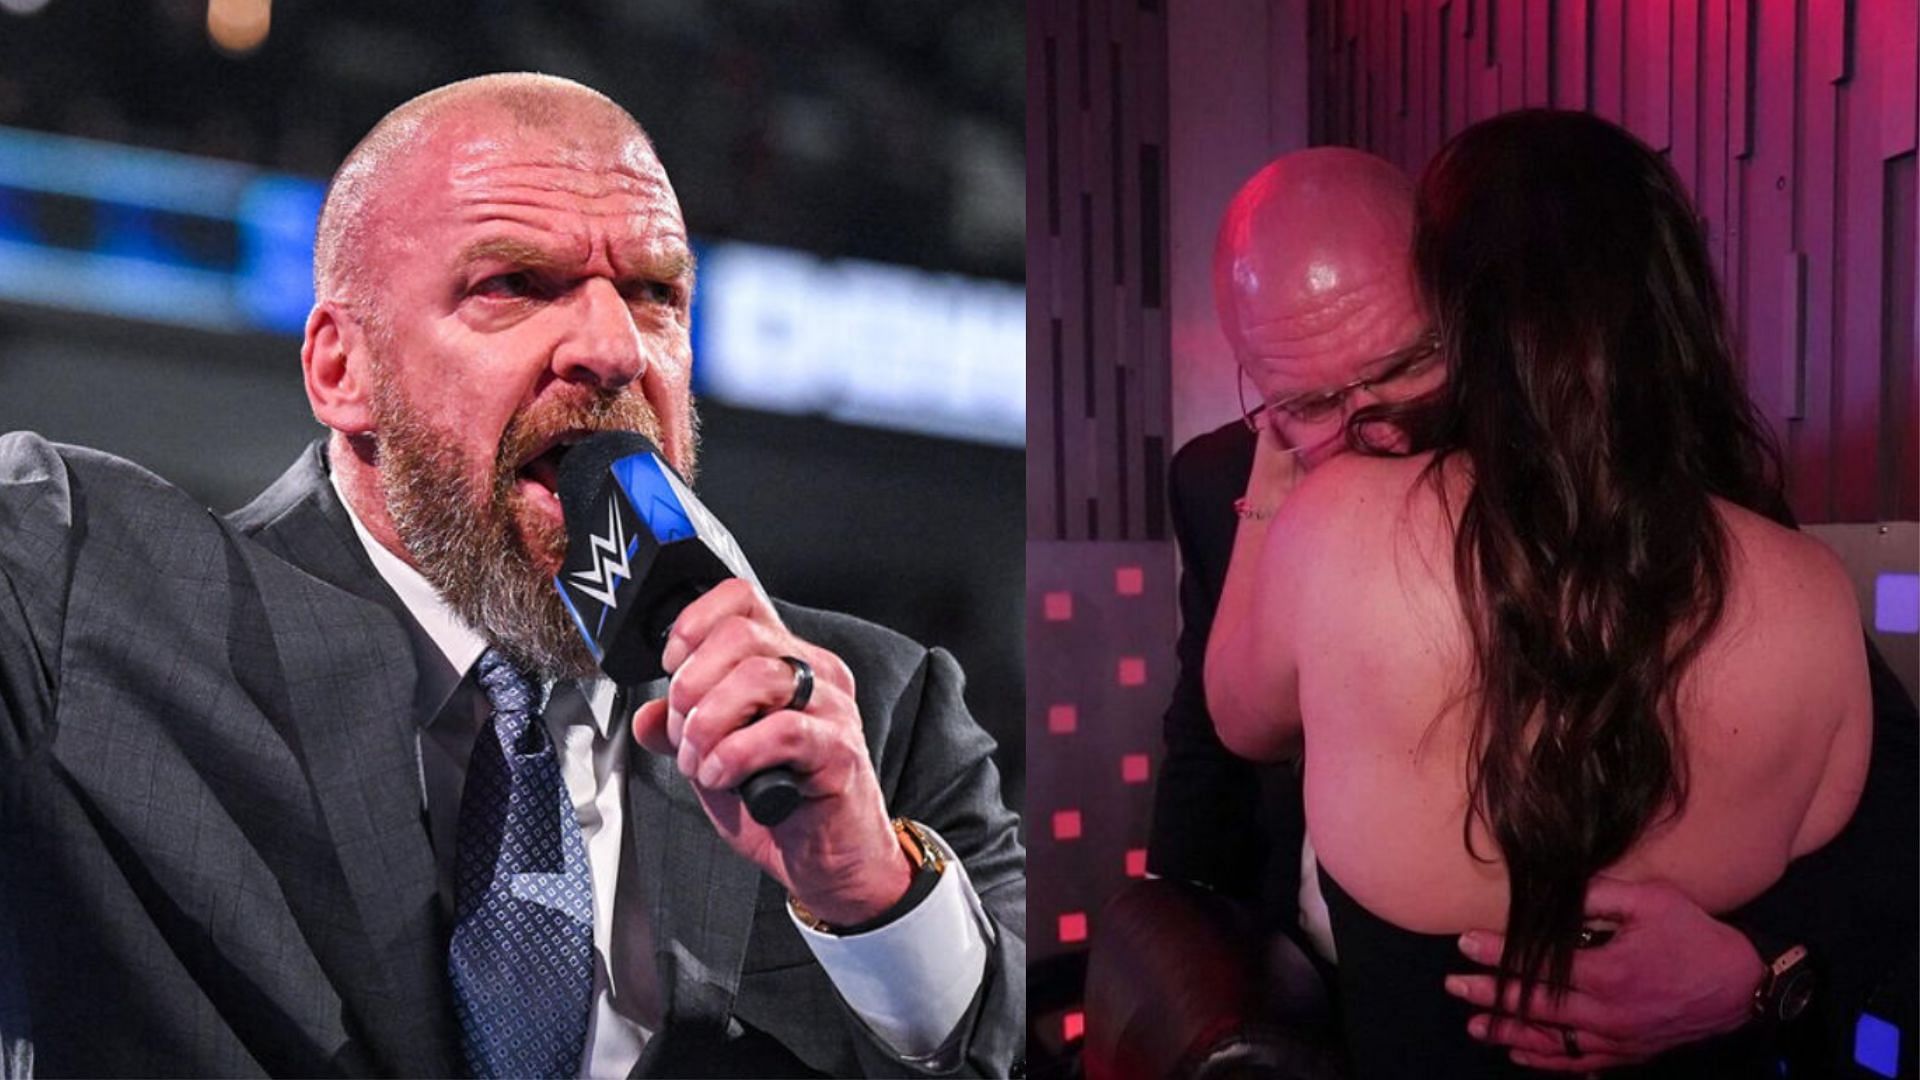 Triple H is the Chief Content Officer of WWE [Image Credits: WWE